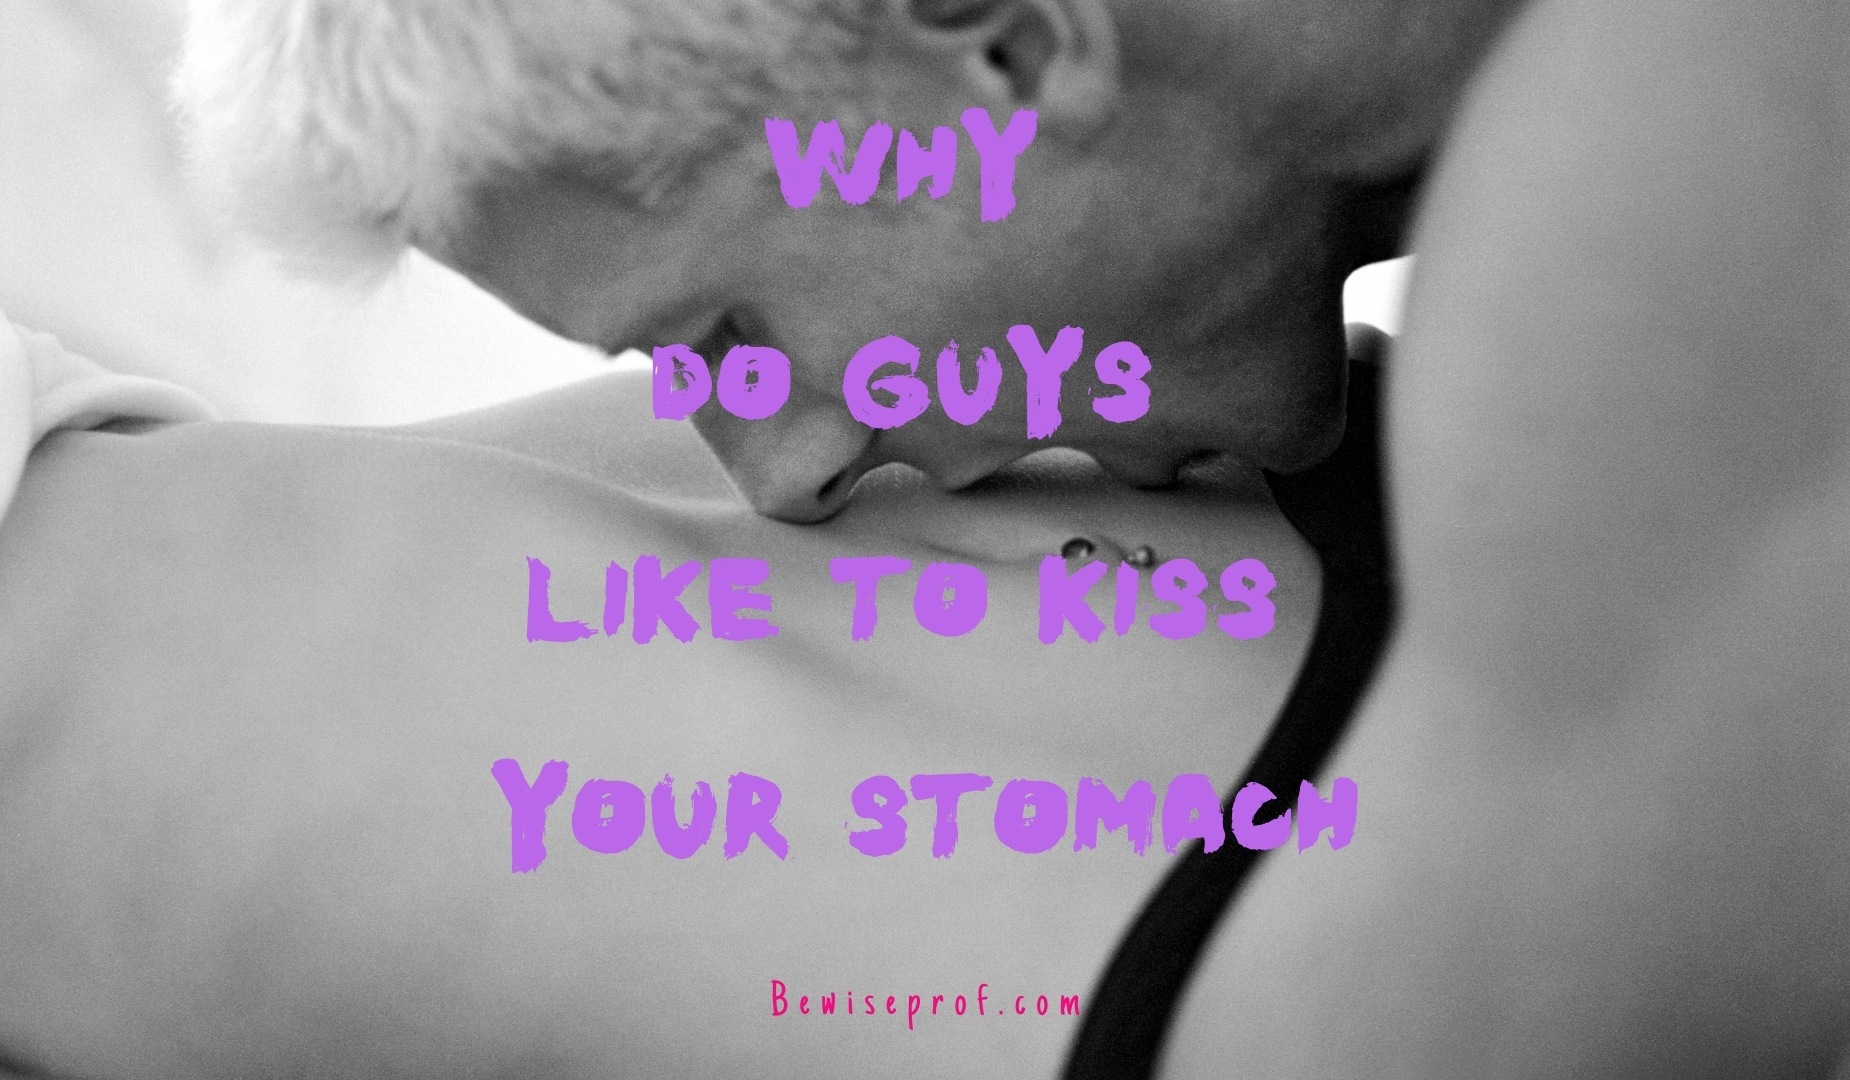 Why Do Guys Like To Kiss Your Stomach